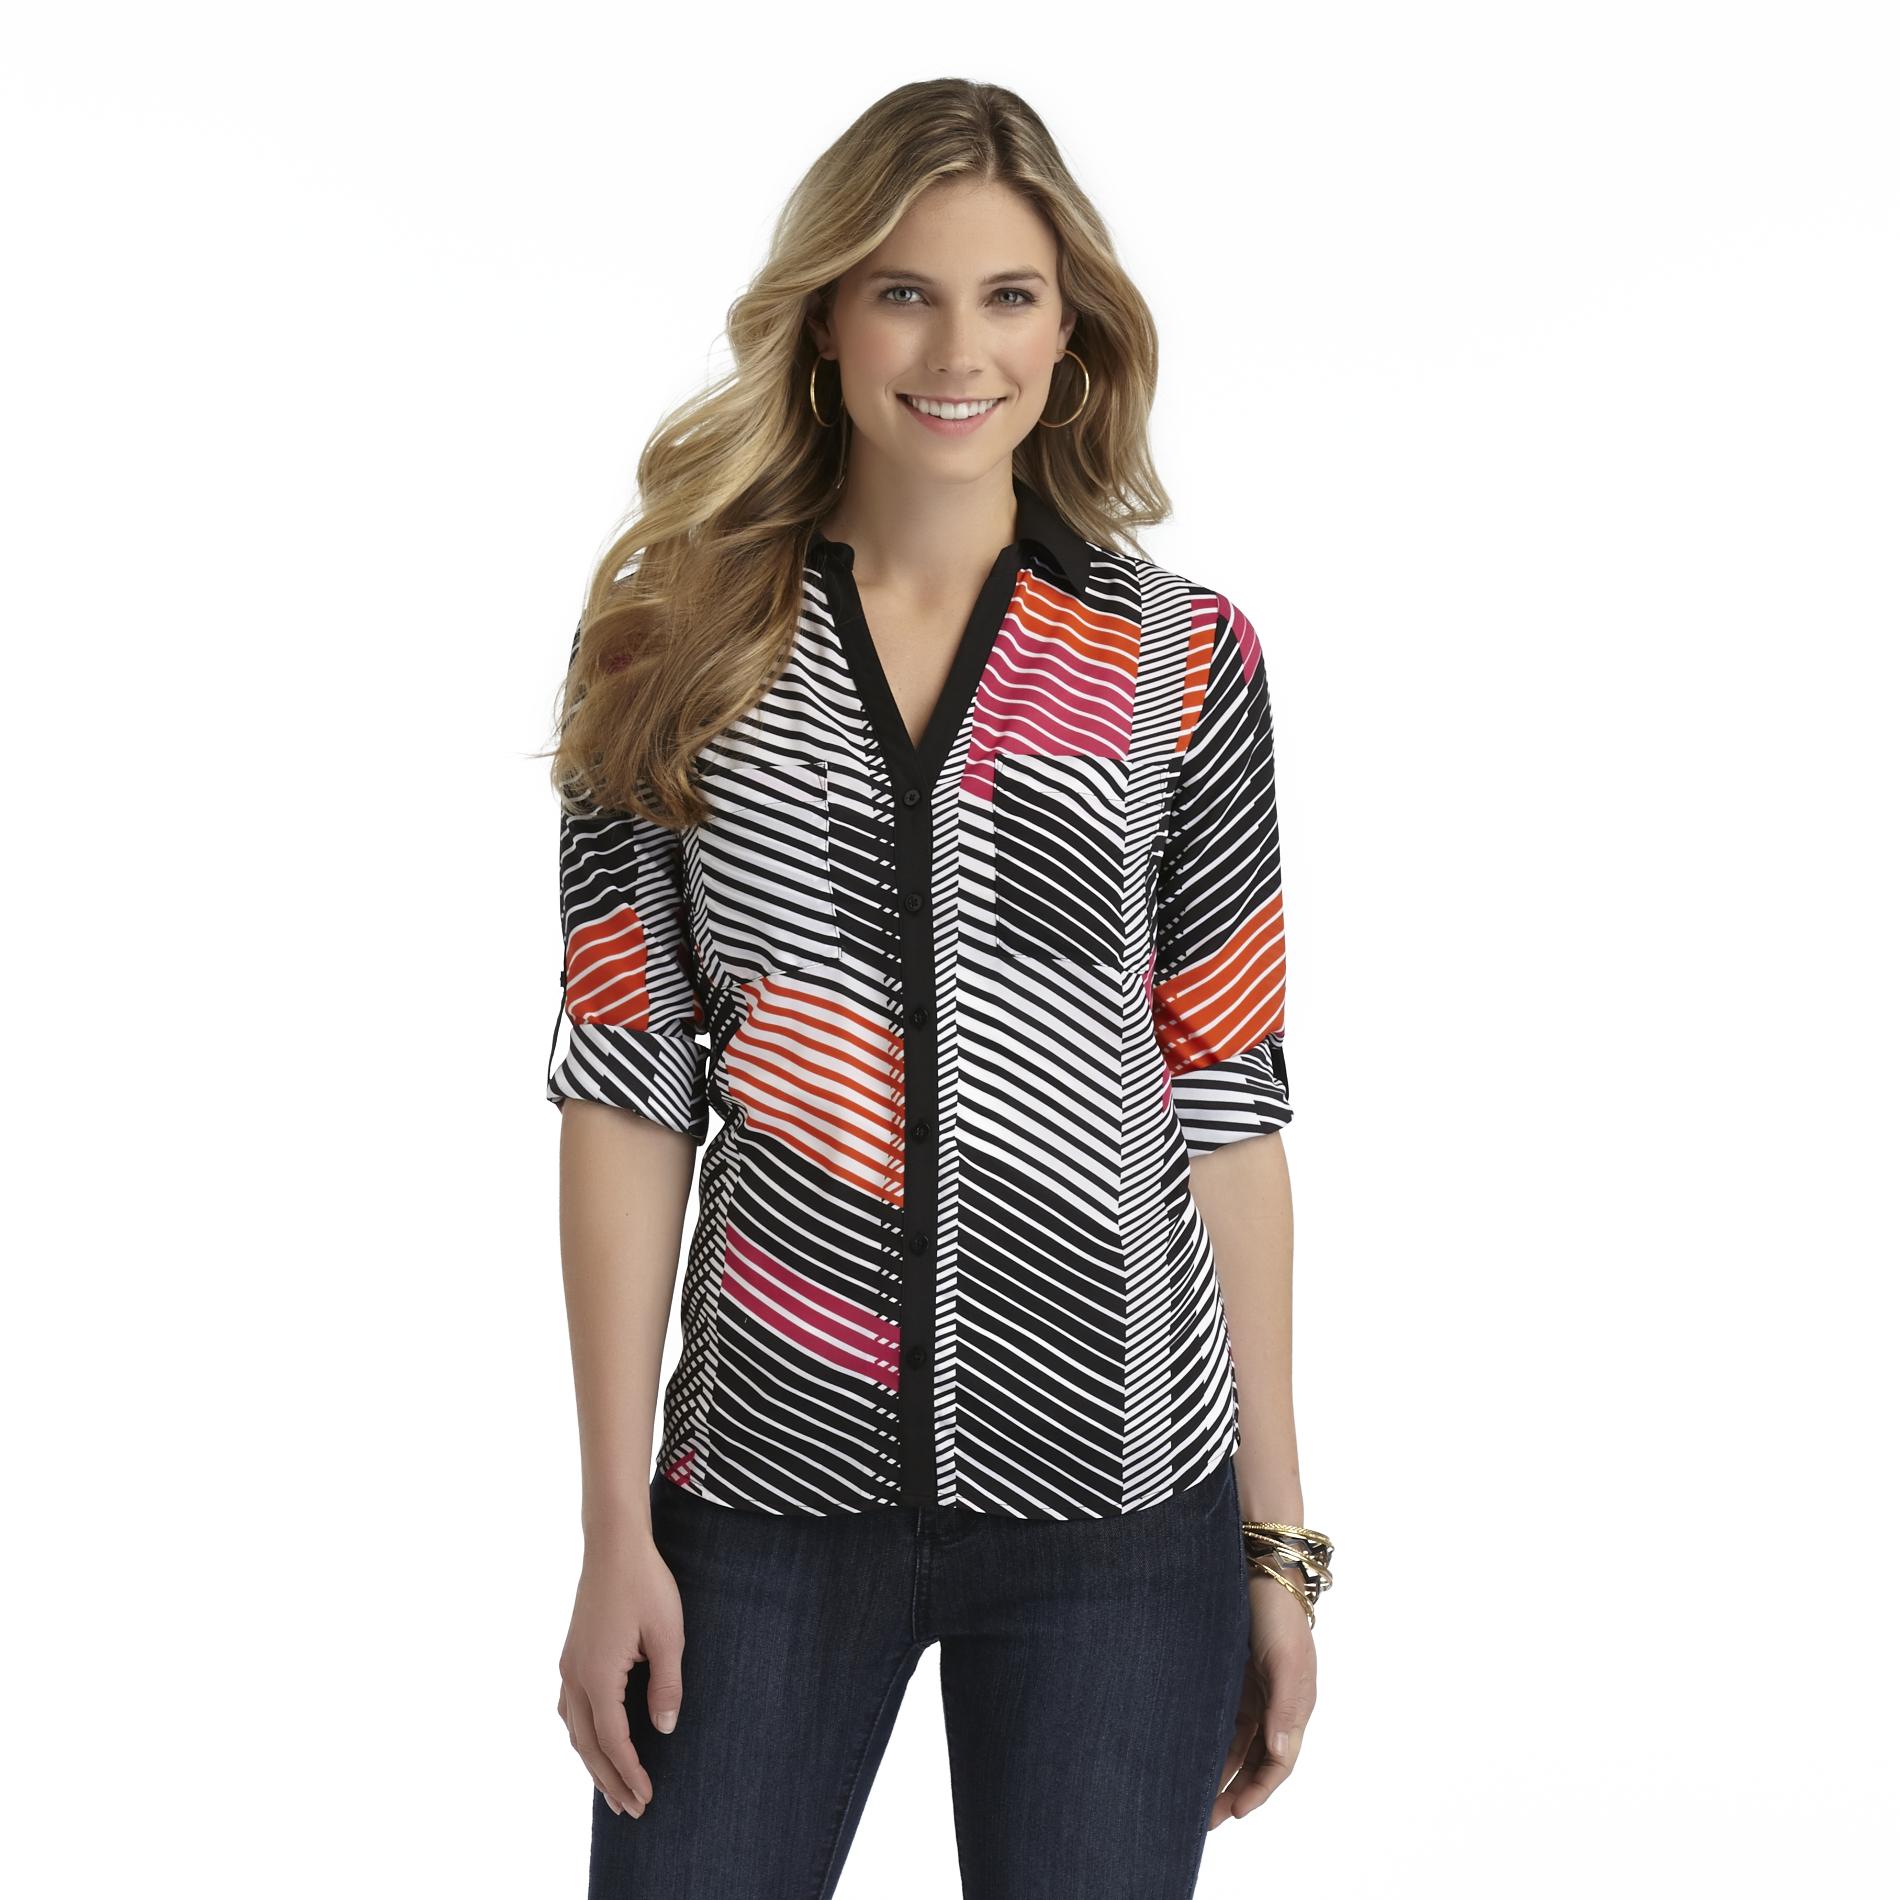 Attention Women's Utility Blouse - Striped